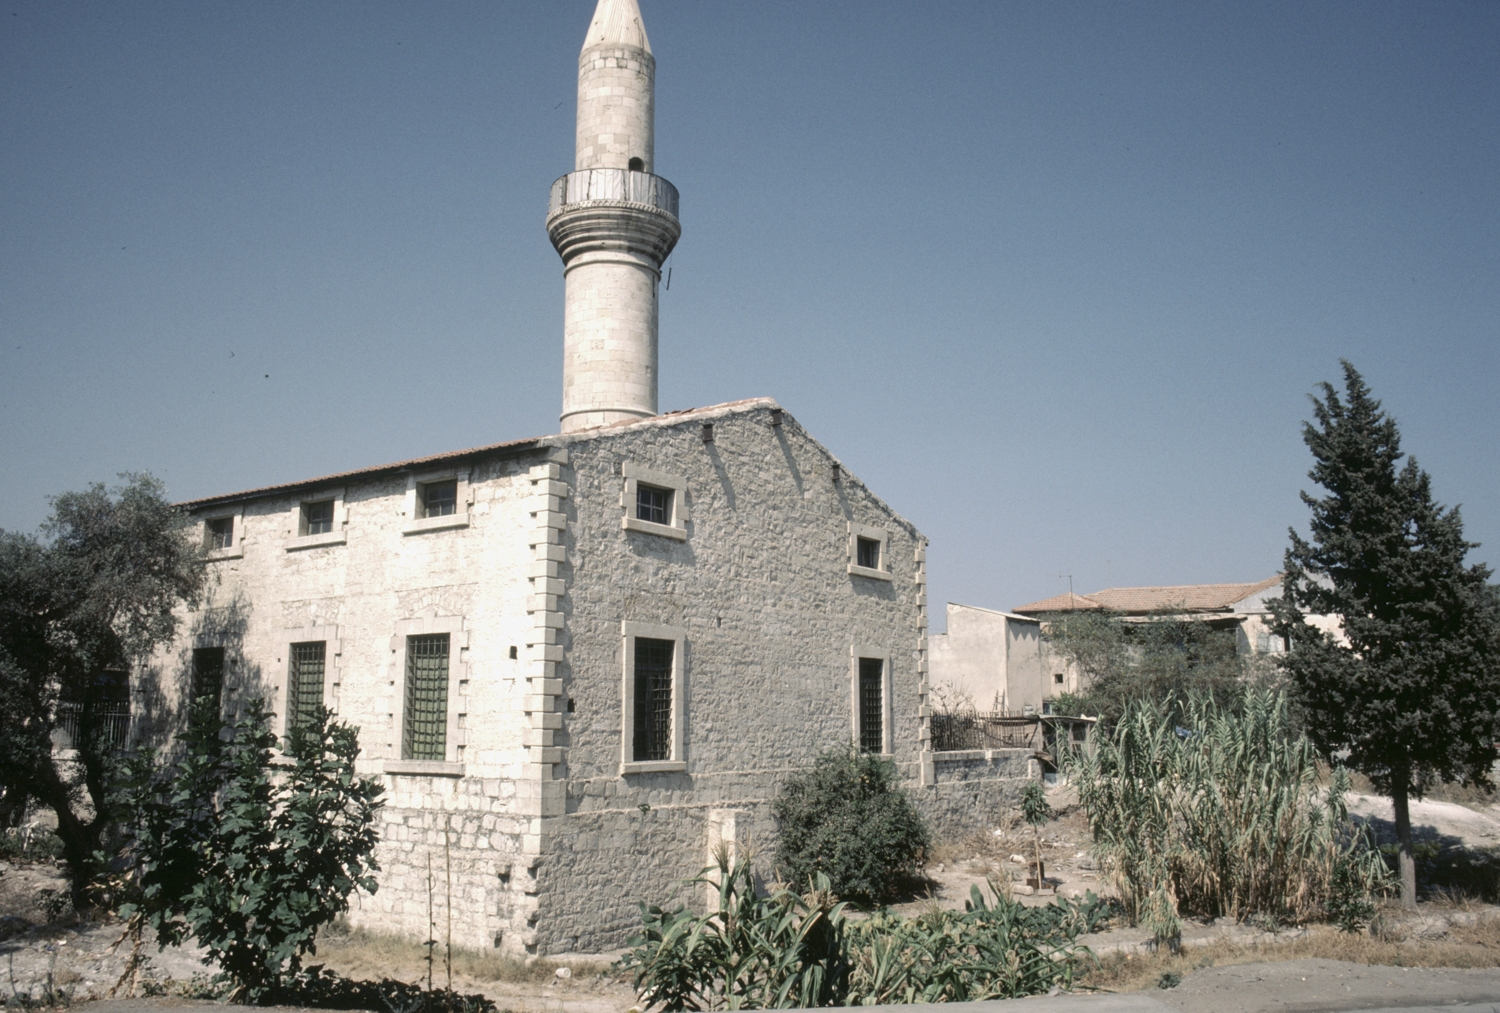 View from Kioproulozade Street to southwestern corner of mosque